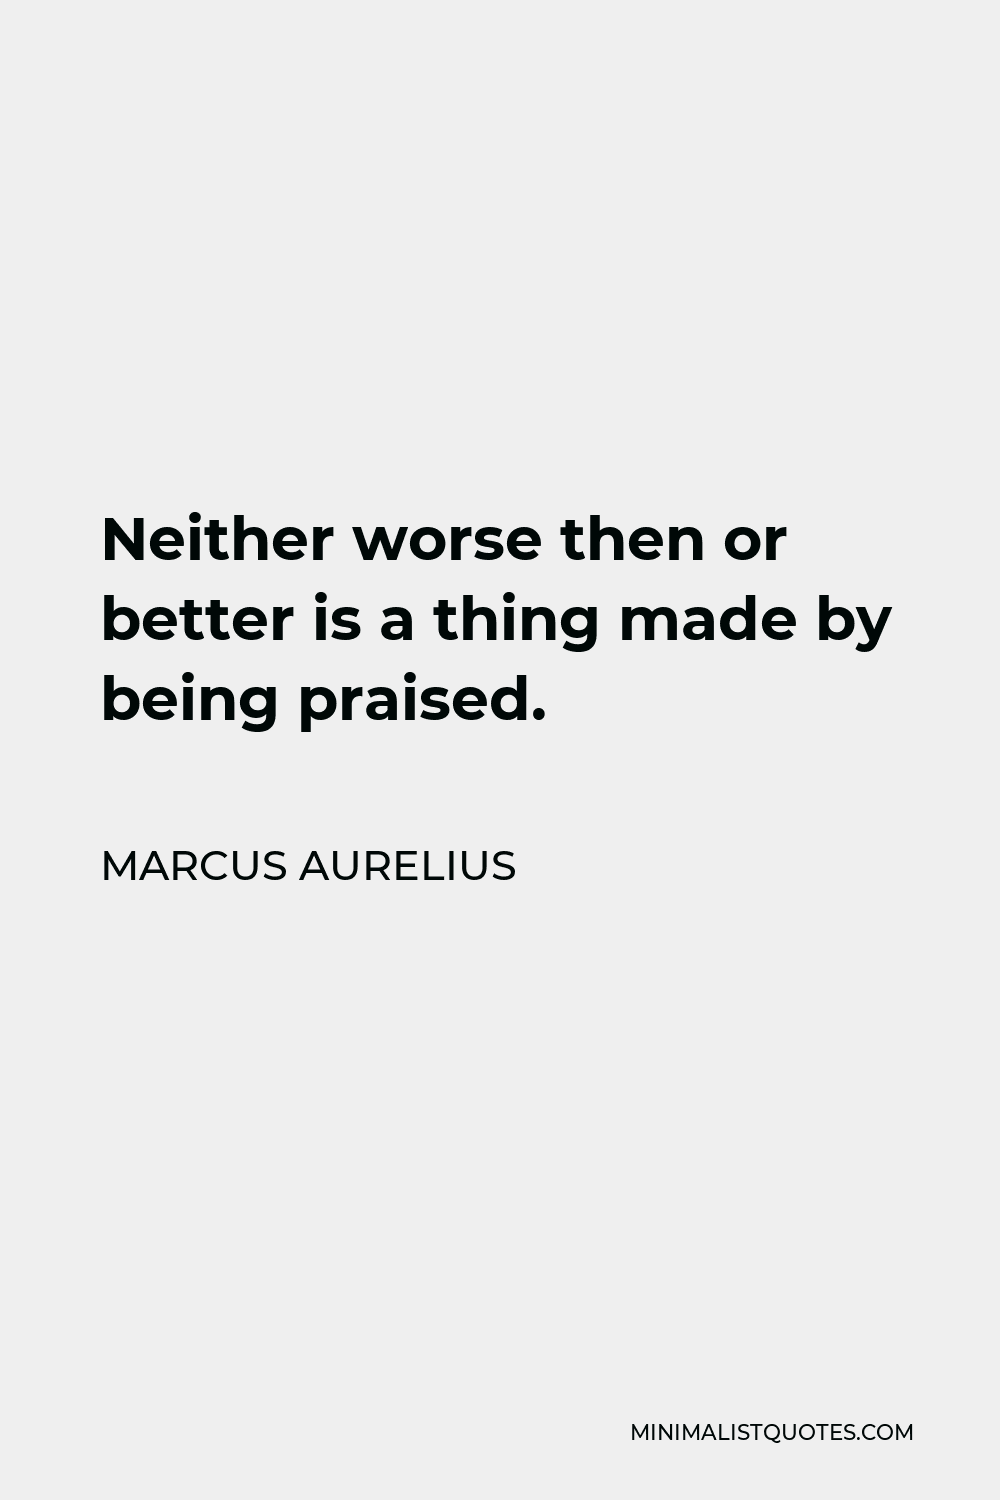 Marcus Aurelius Quote - Neither worse then or better is a thing made by being praised.